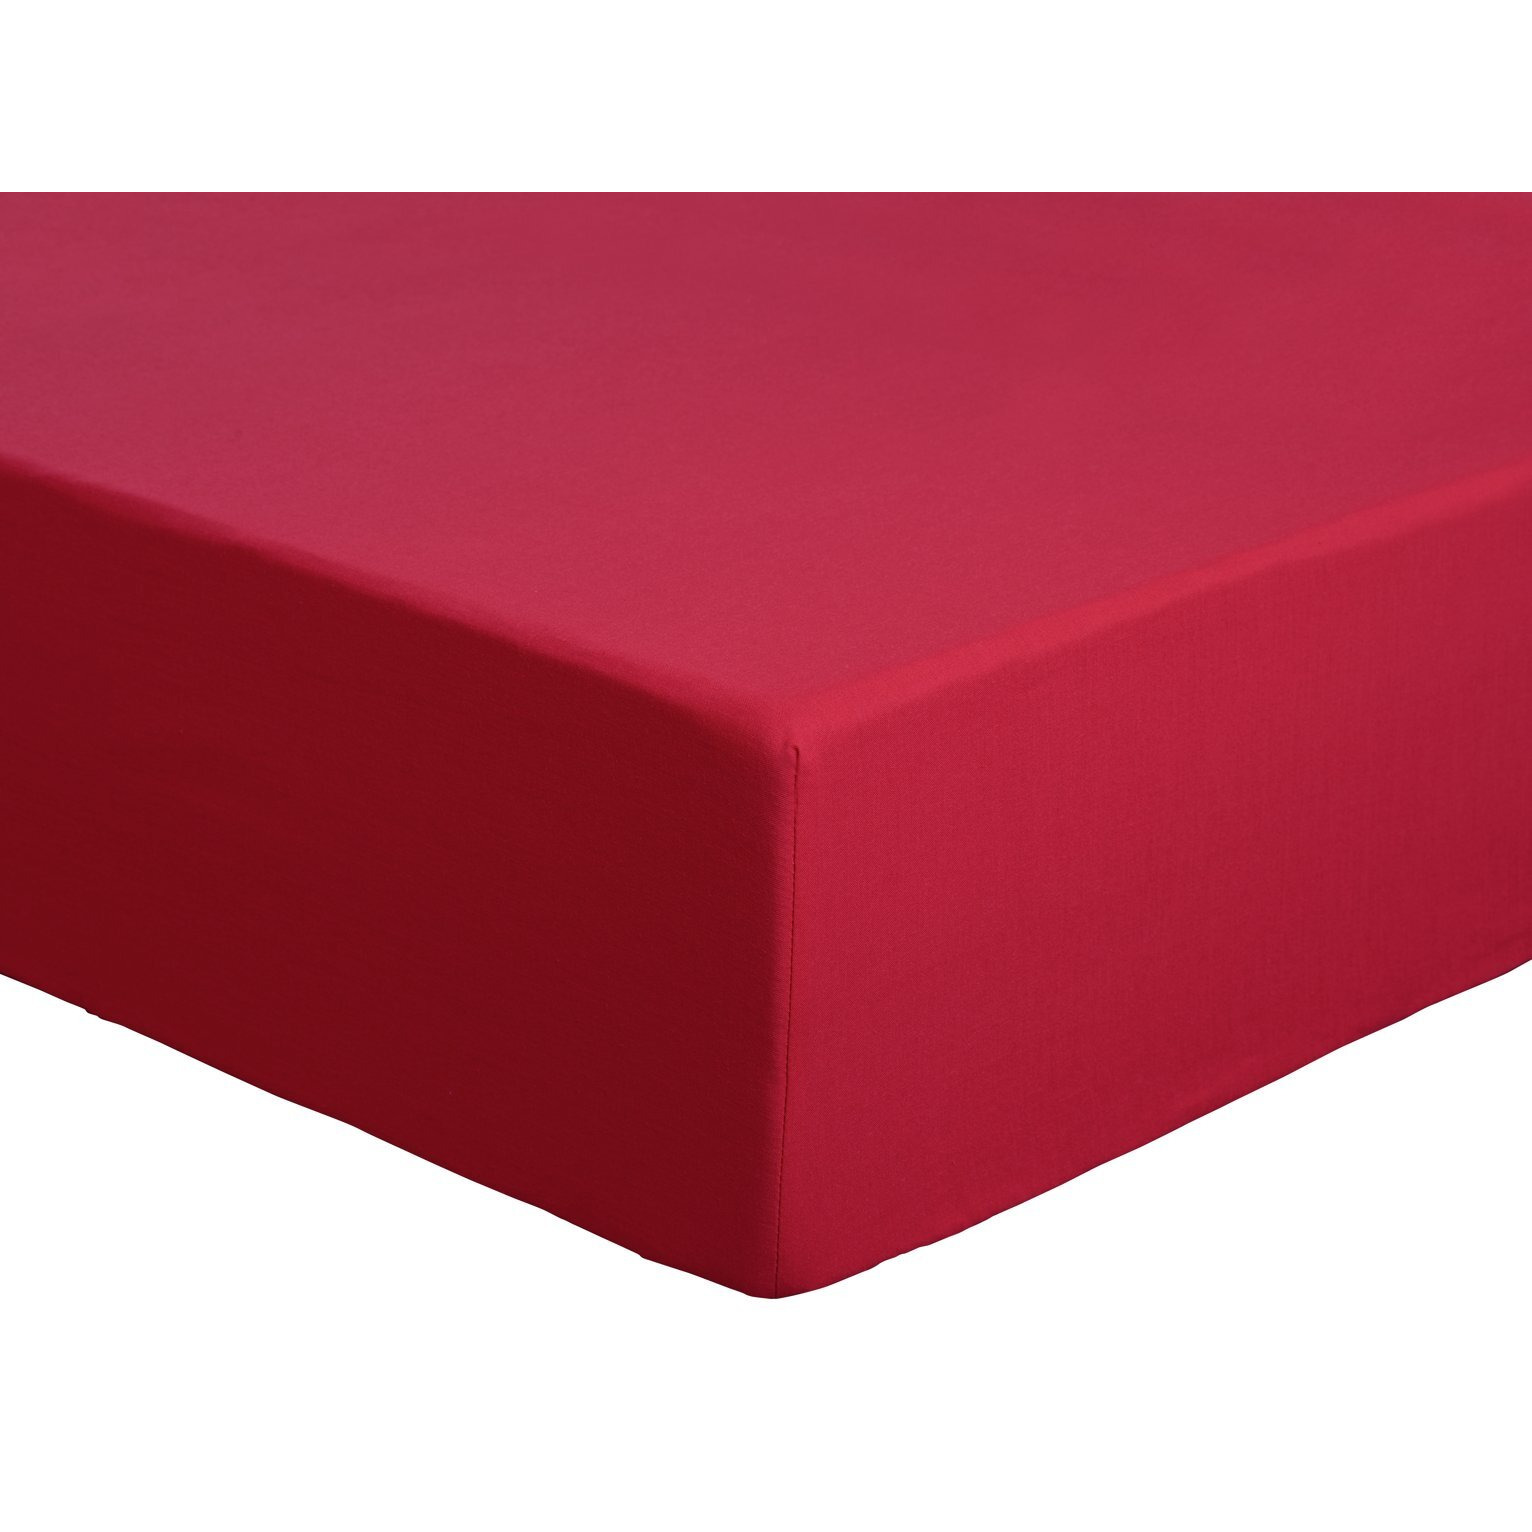 Habitat Easycare Plain Red Fitted Sheet - Double - image 1